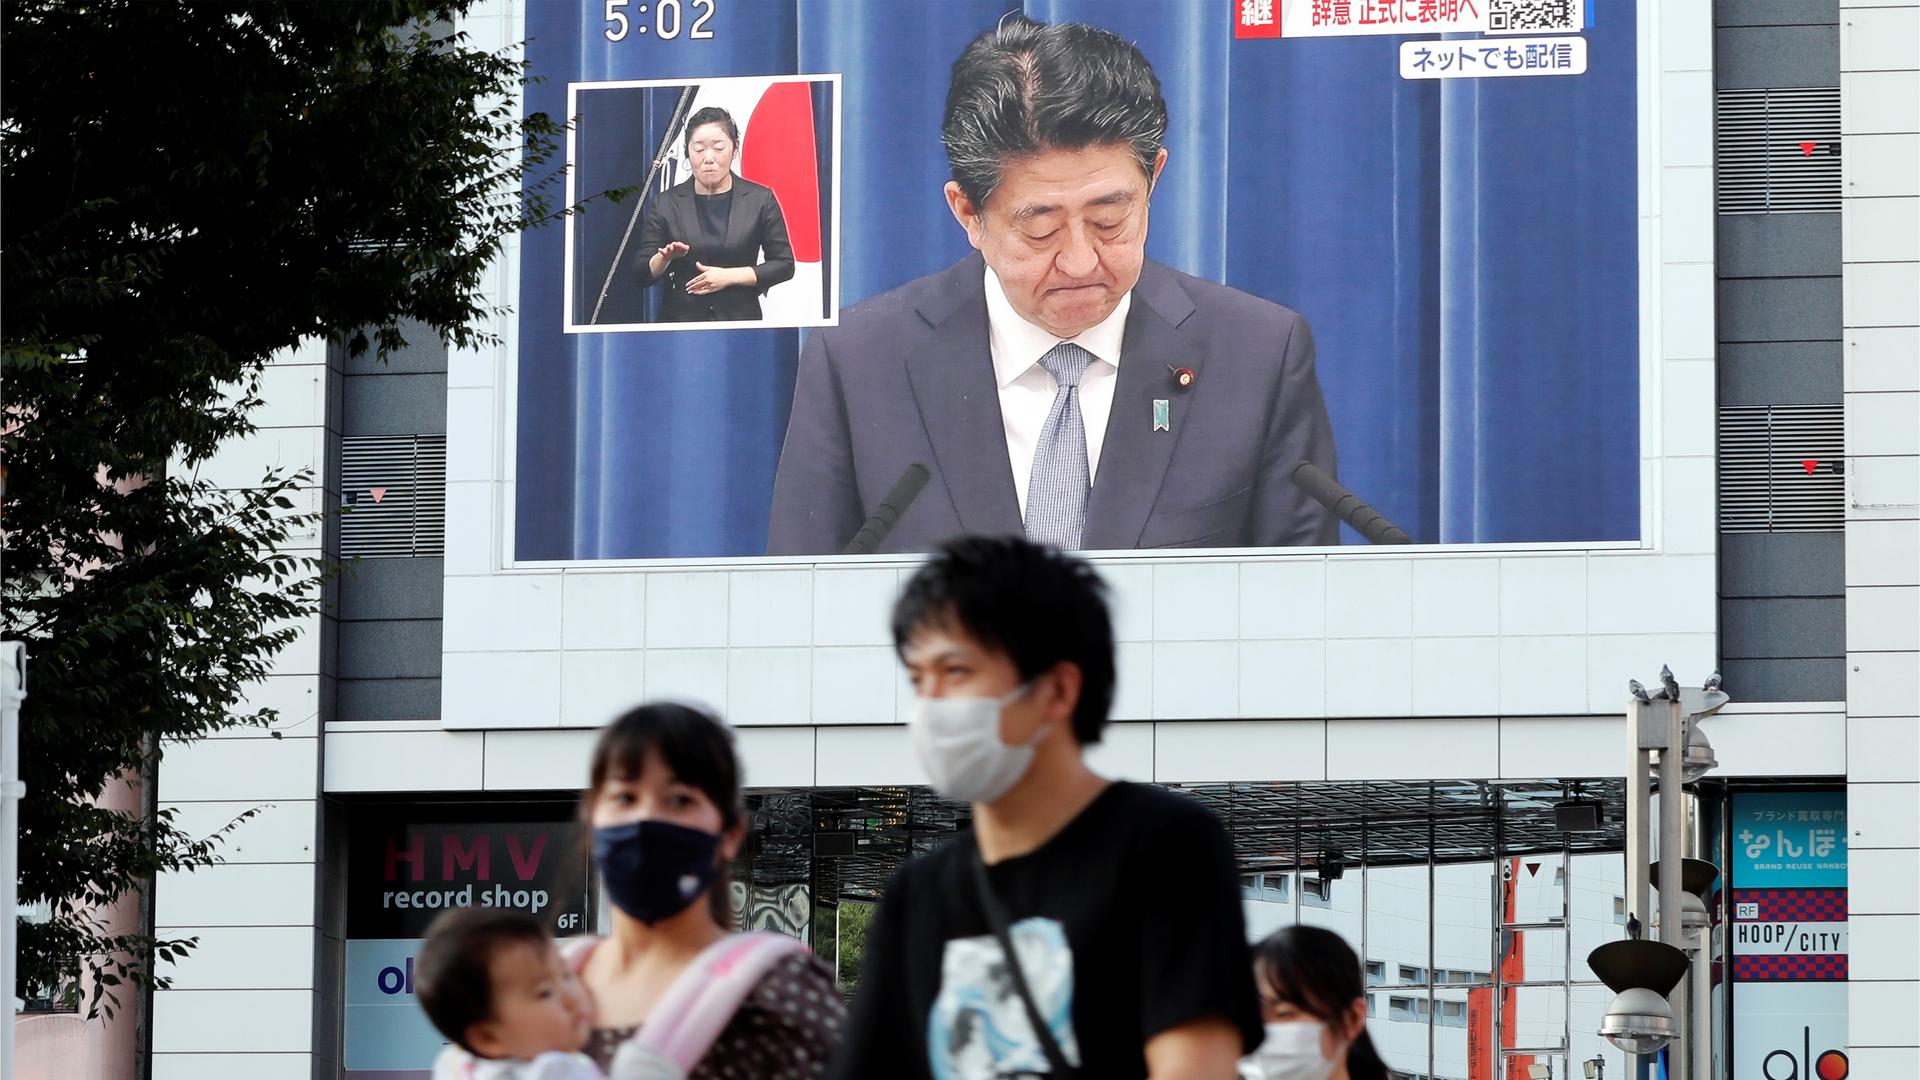 People walk past a large screen in Tokyo, Japan, broadcasting the news conference of Japanese Prime Minister Shinzo Abe where he announced his resignation. 